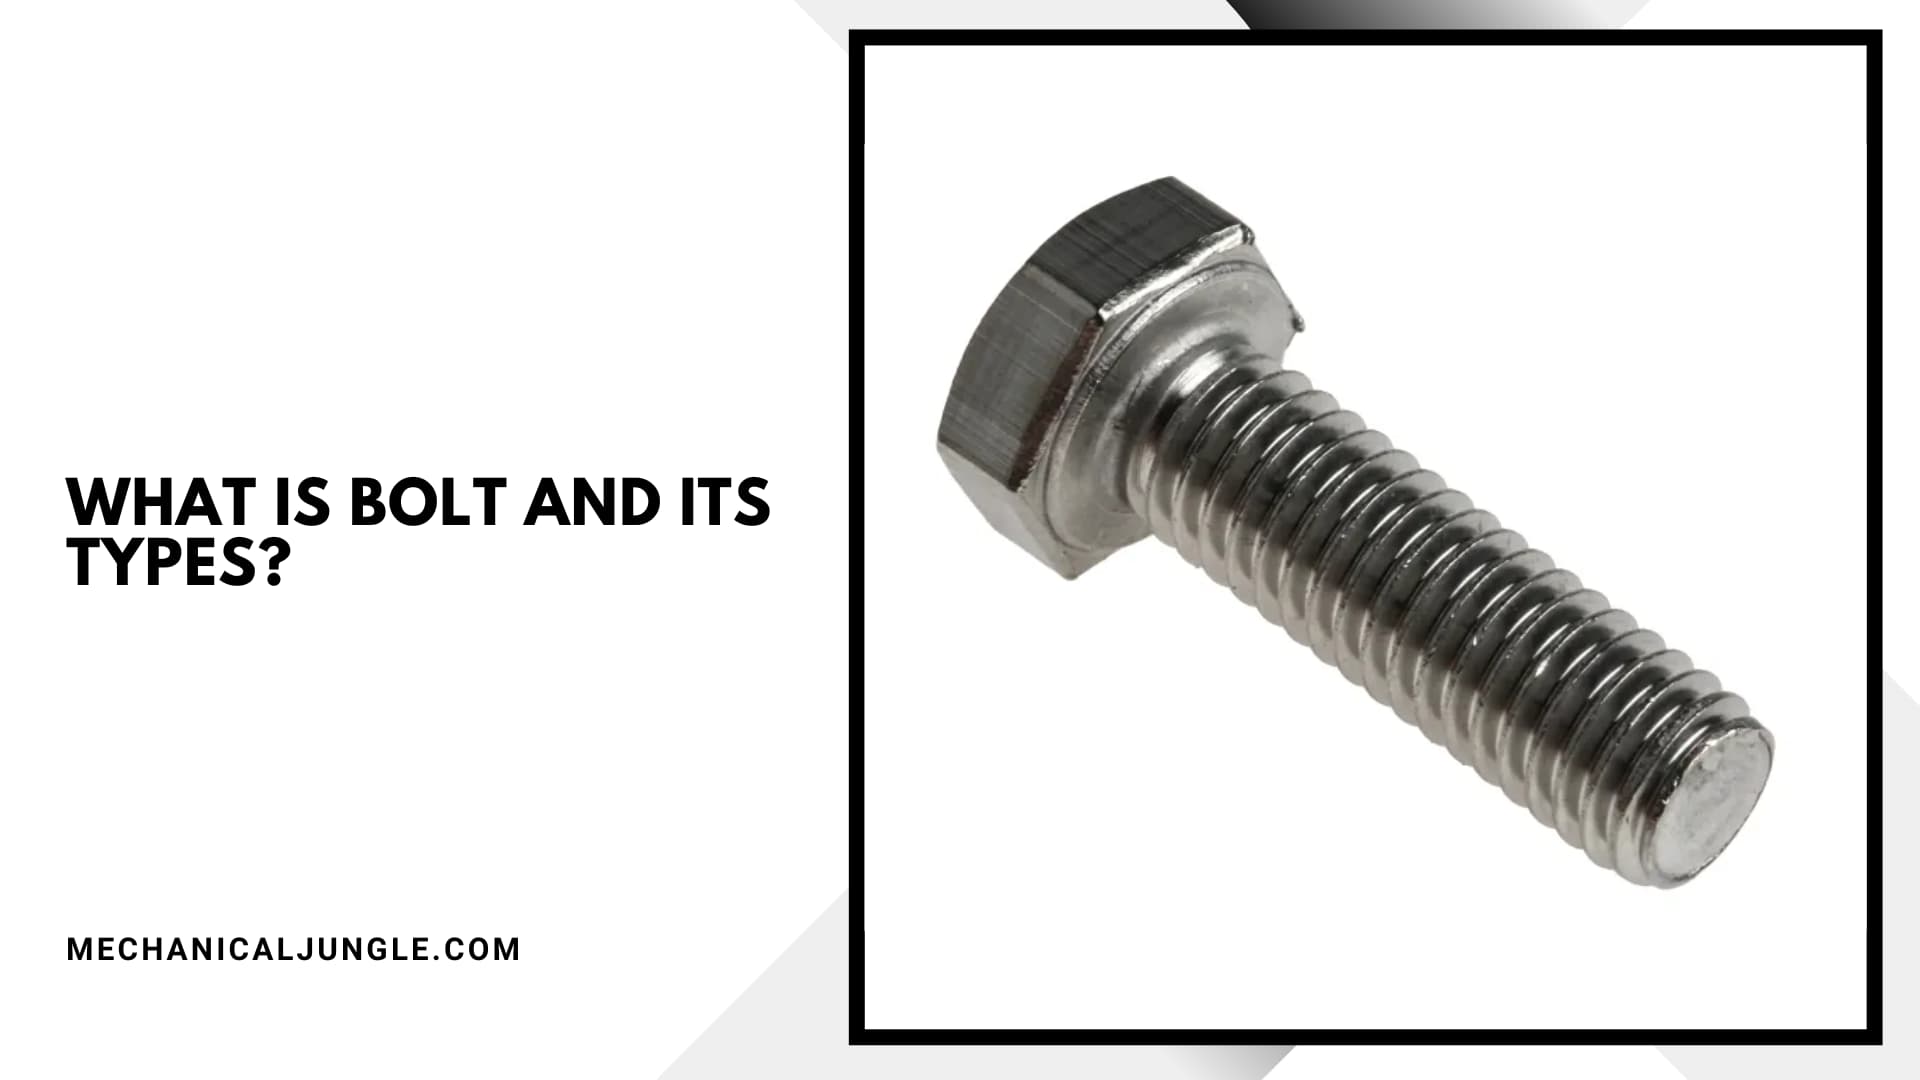 What Is Bolt and Its Types?